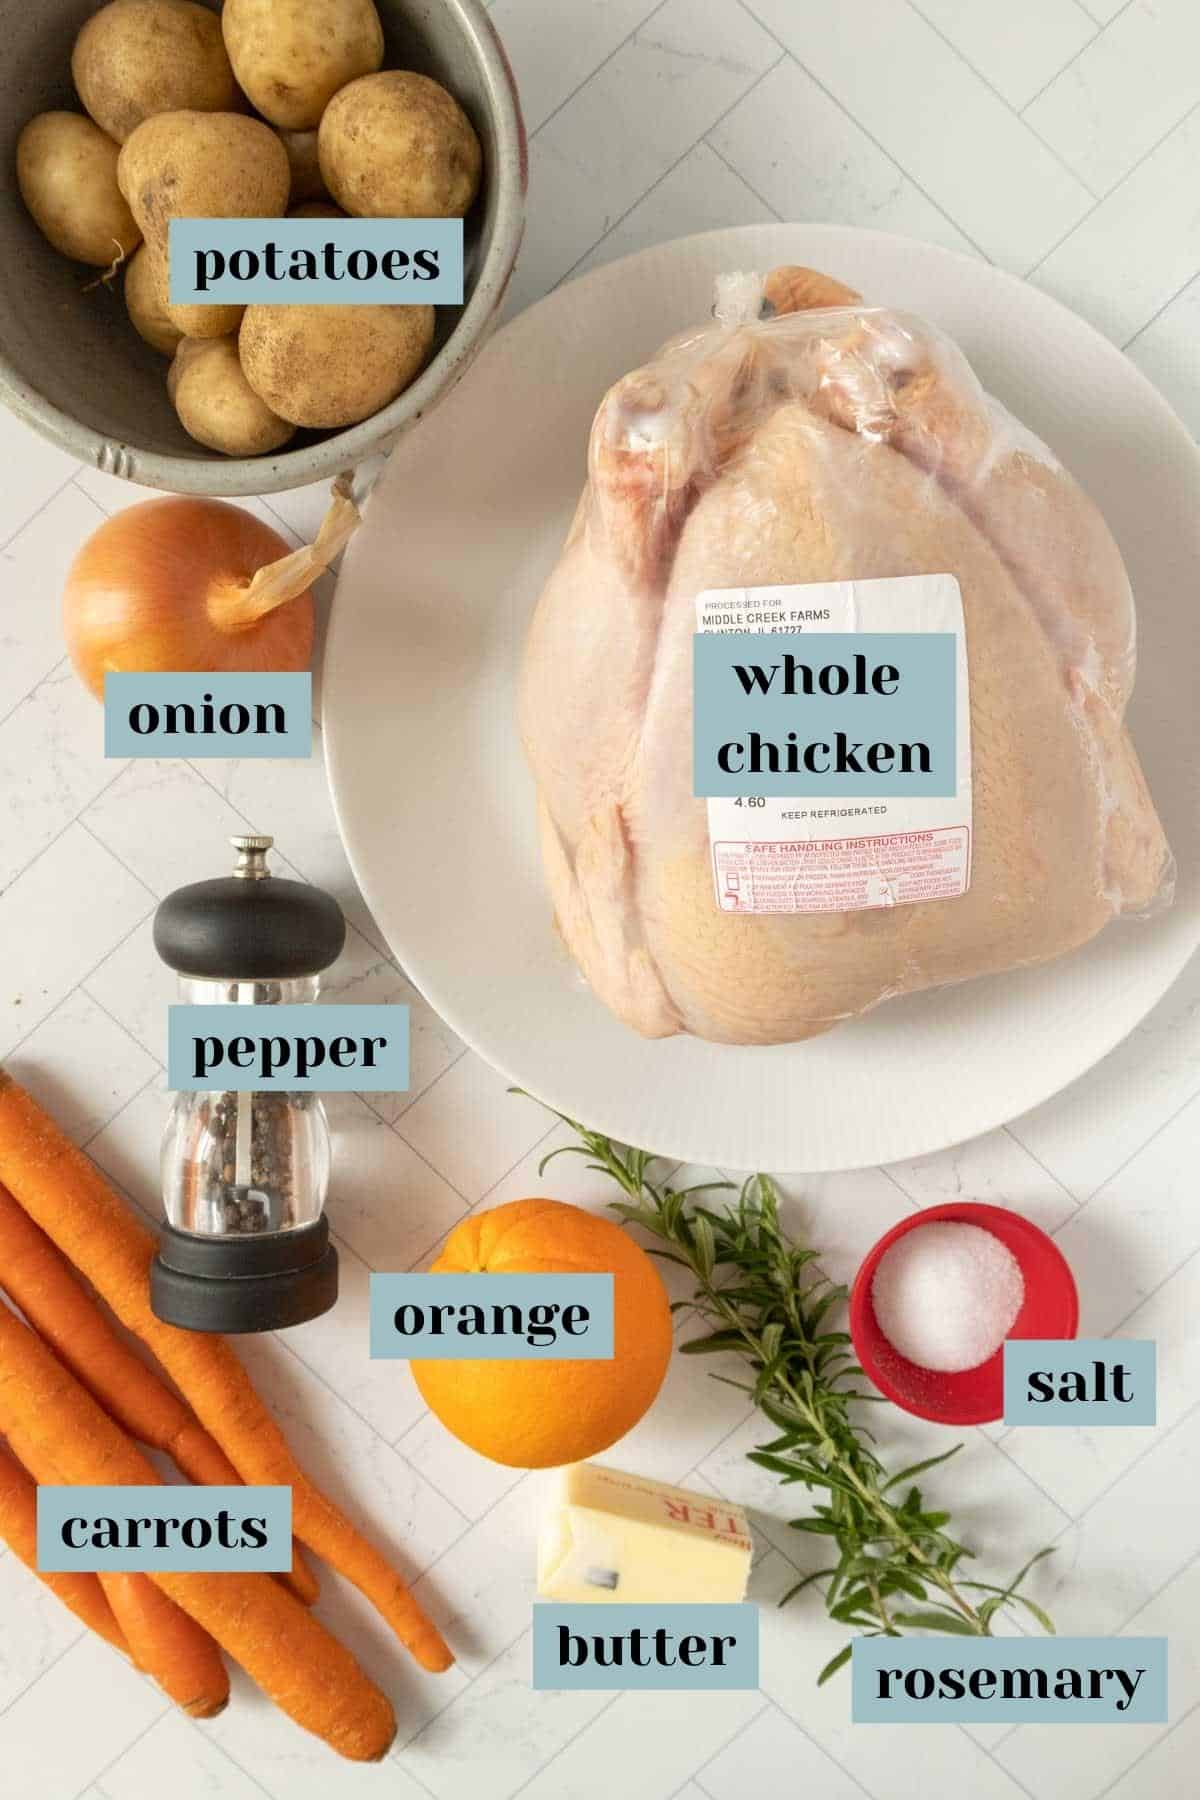 The ingredients for a chicken recipe are shown on a white plate.